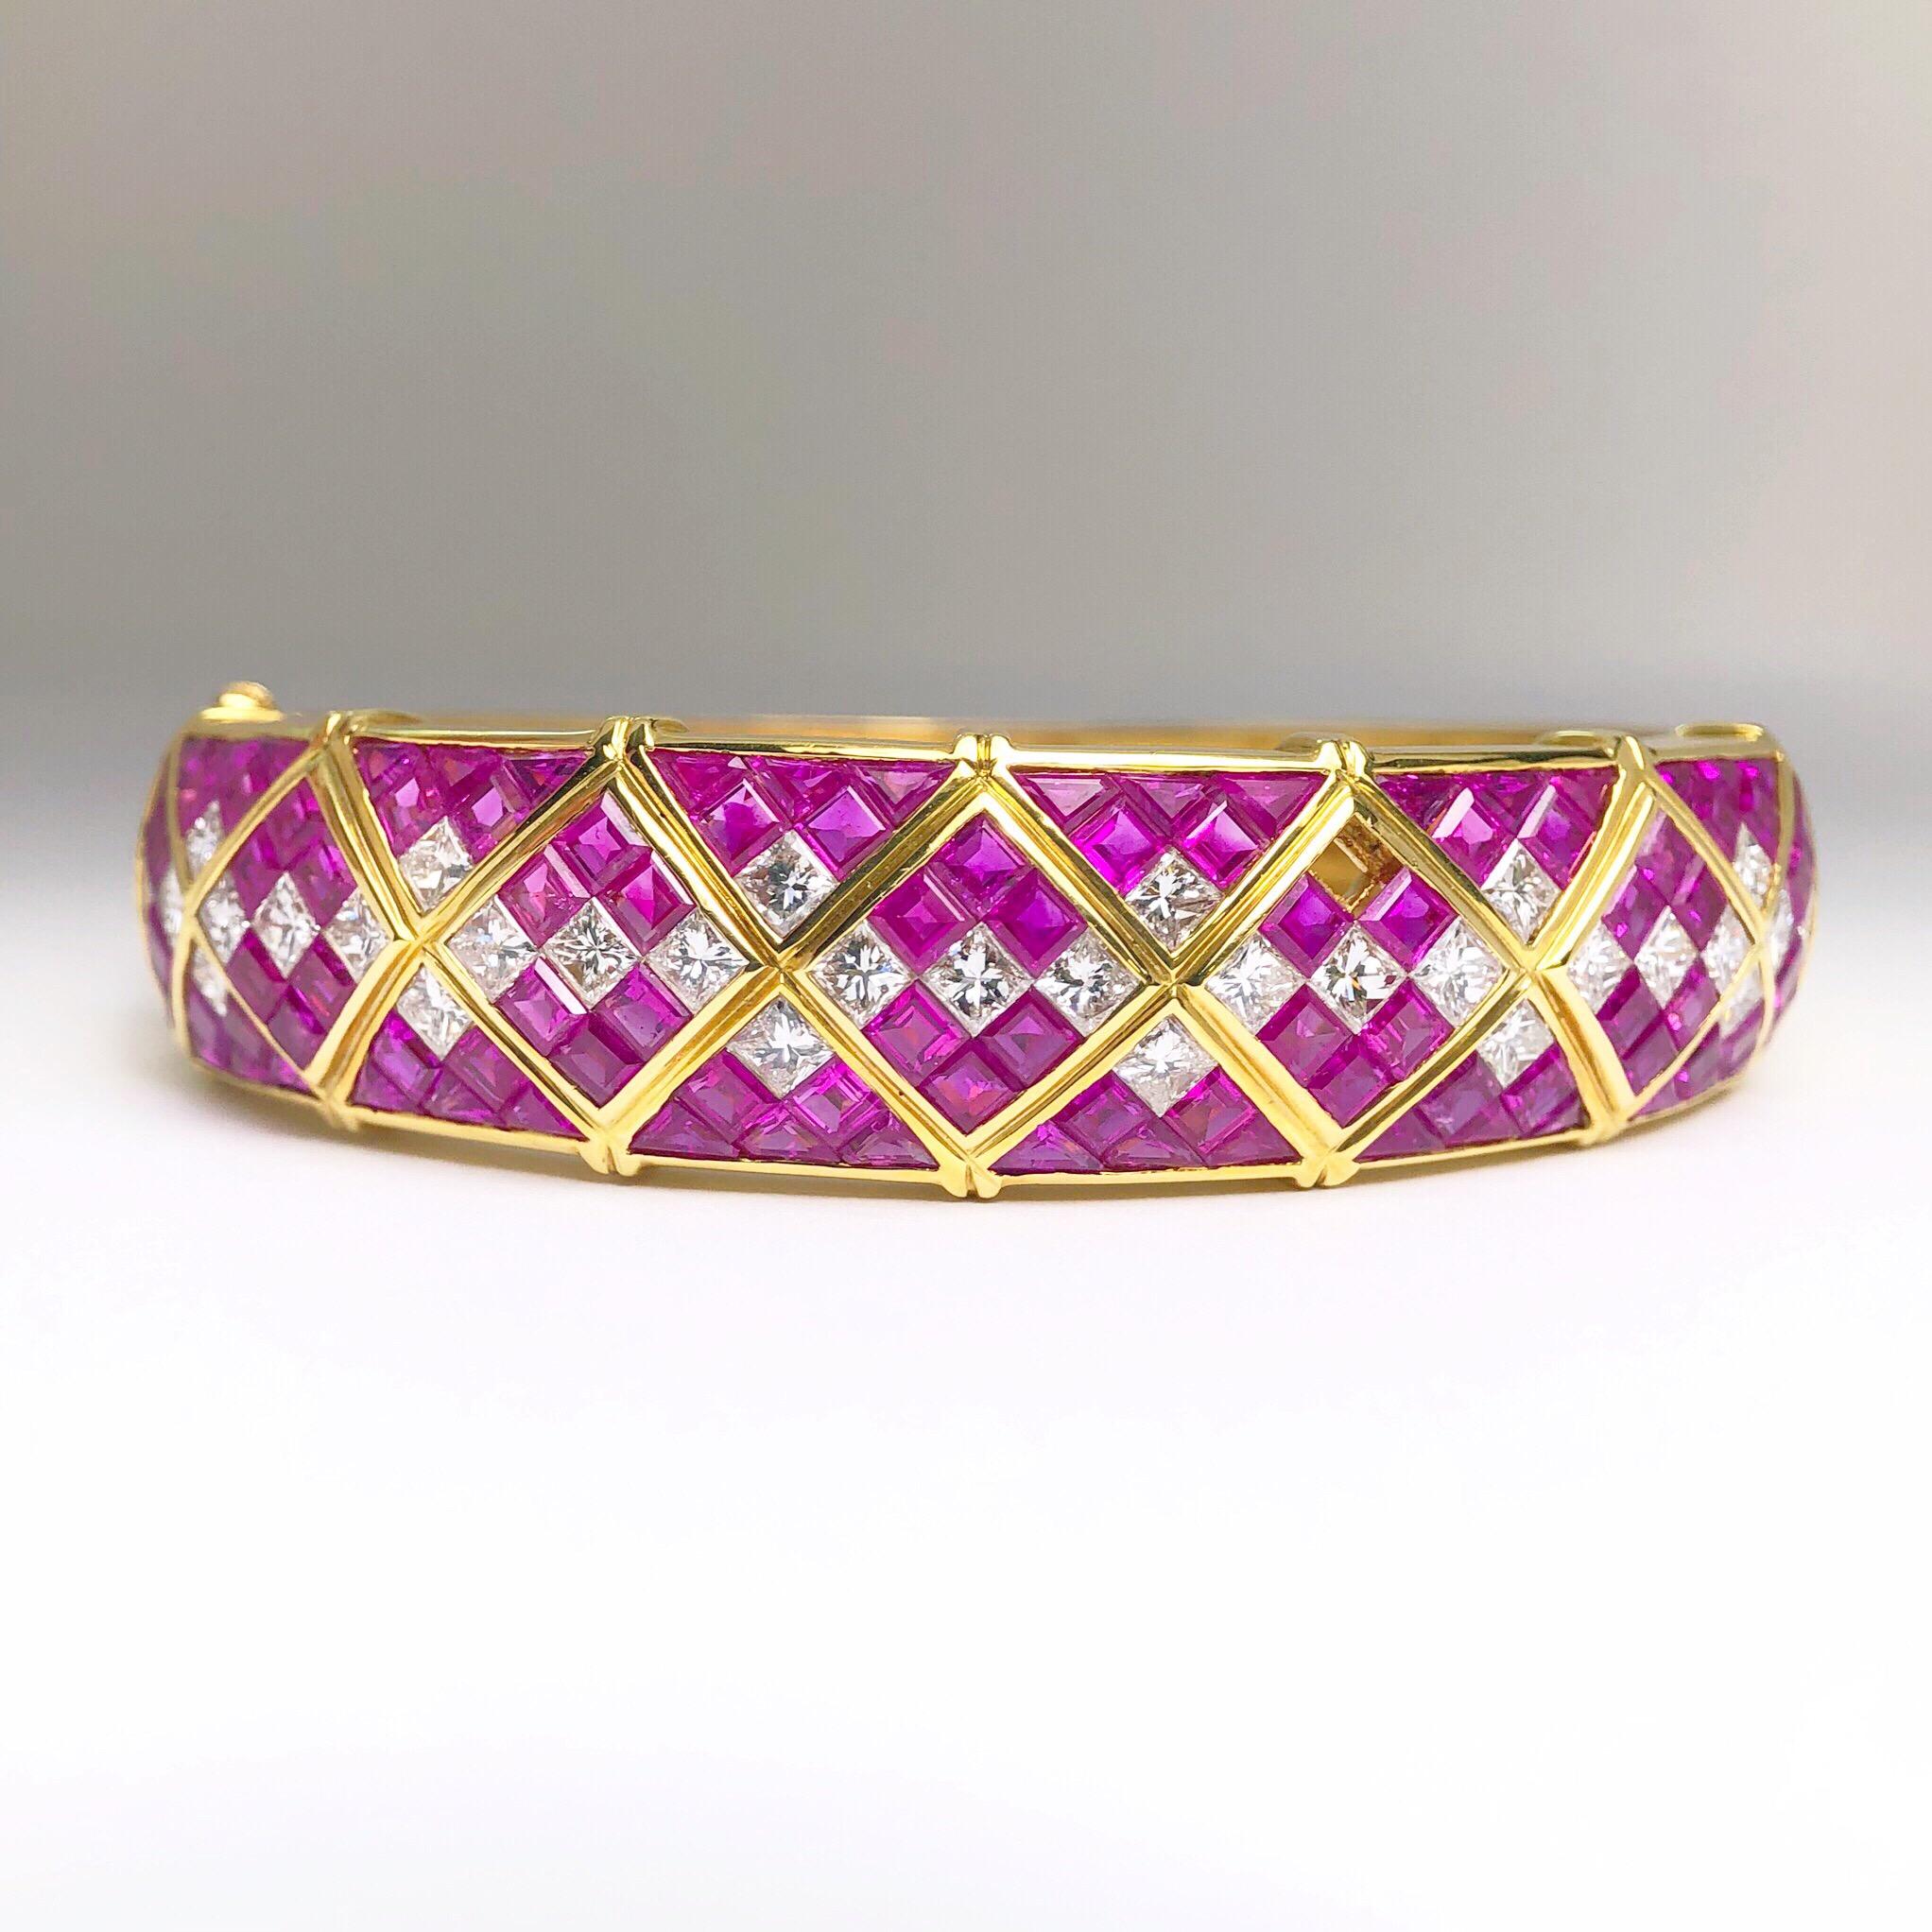 Princess Cut 18Kt Gold, 10.35Ct Pink Sapphire and 3.91Ct Diamond Harlequin Pattern Bracelet For Sale